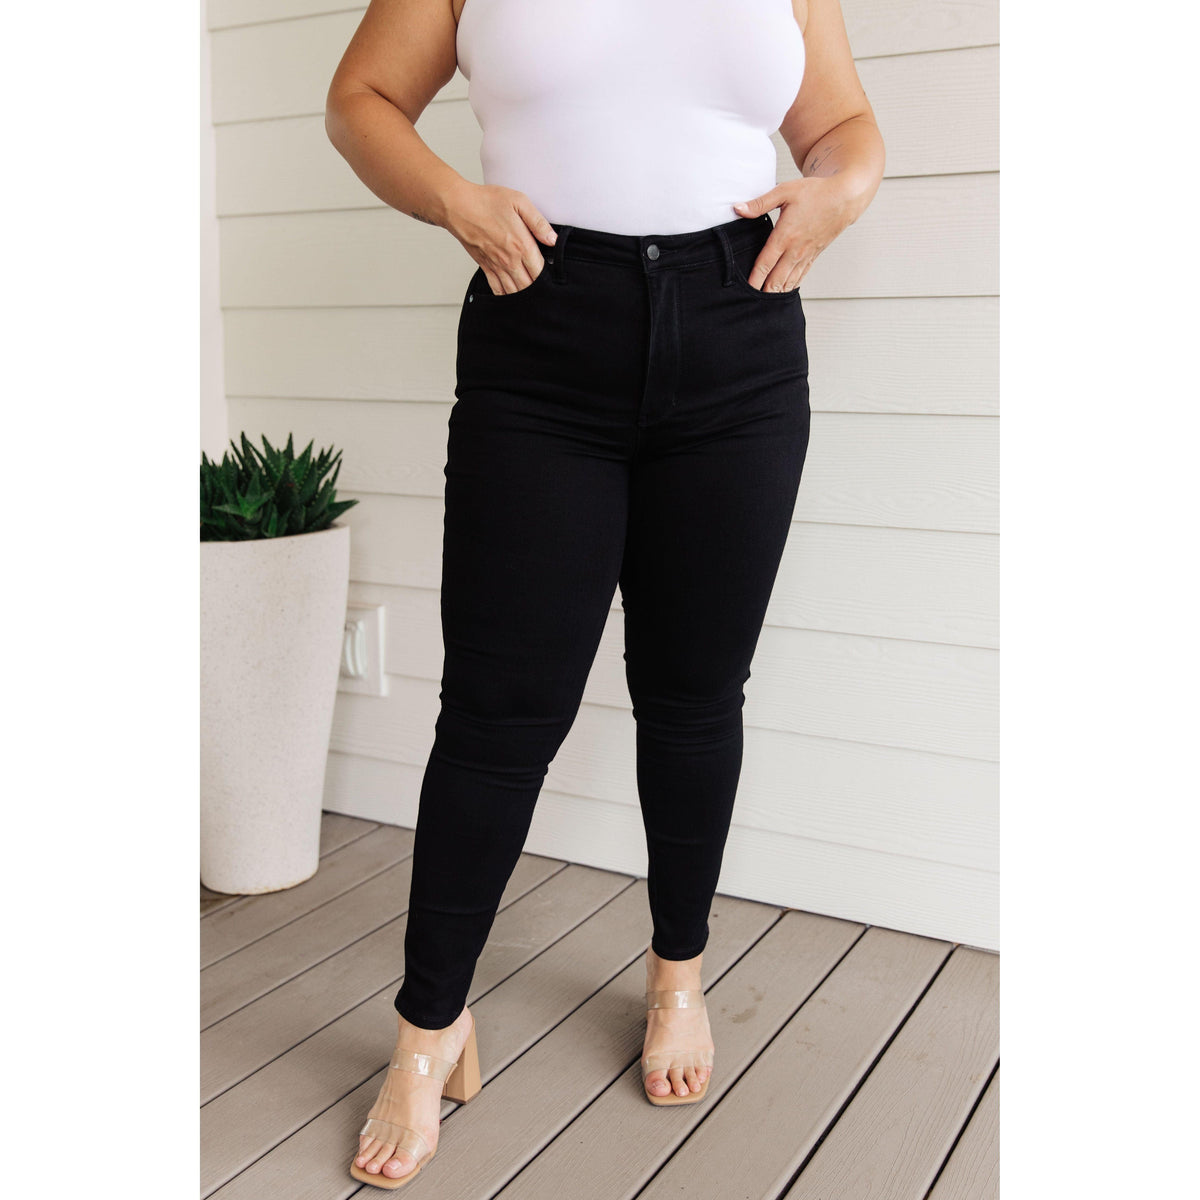 Judy Blue | Audrey High Rise Control Top Classic Skinny Jeans in Black - becauseofadi